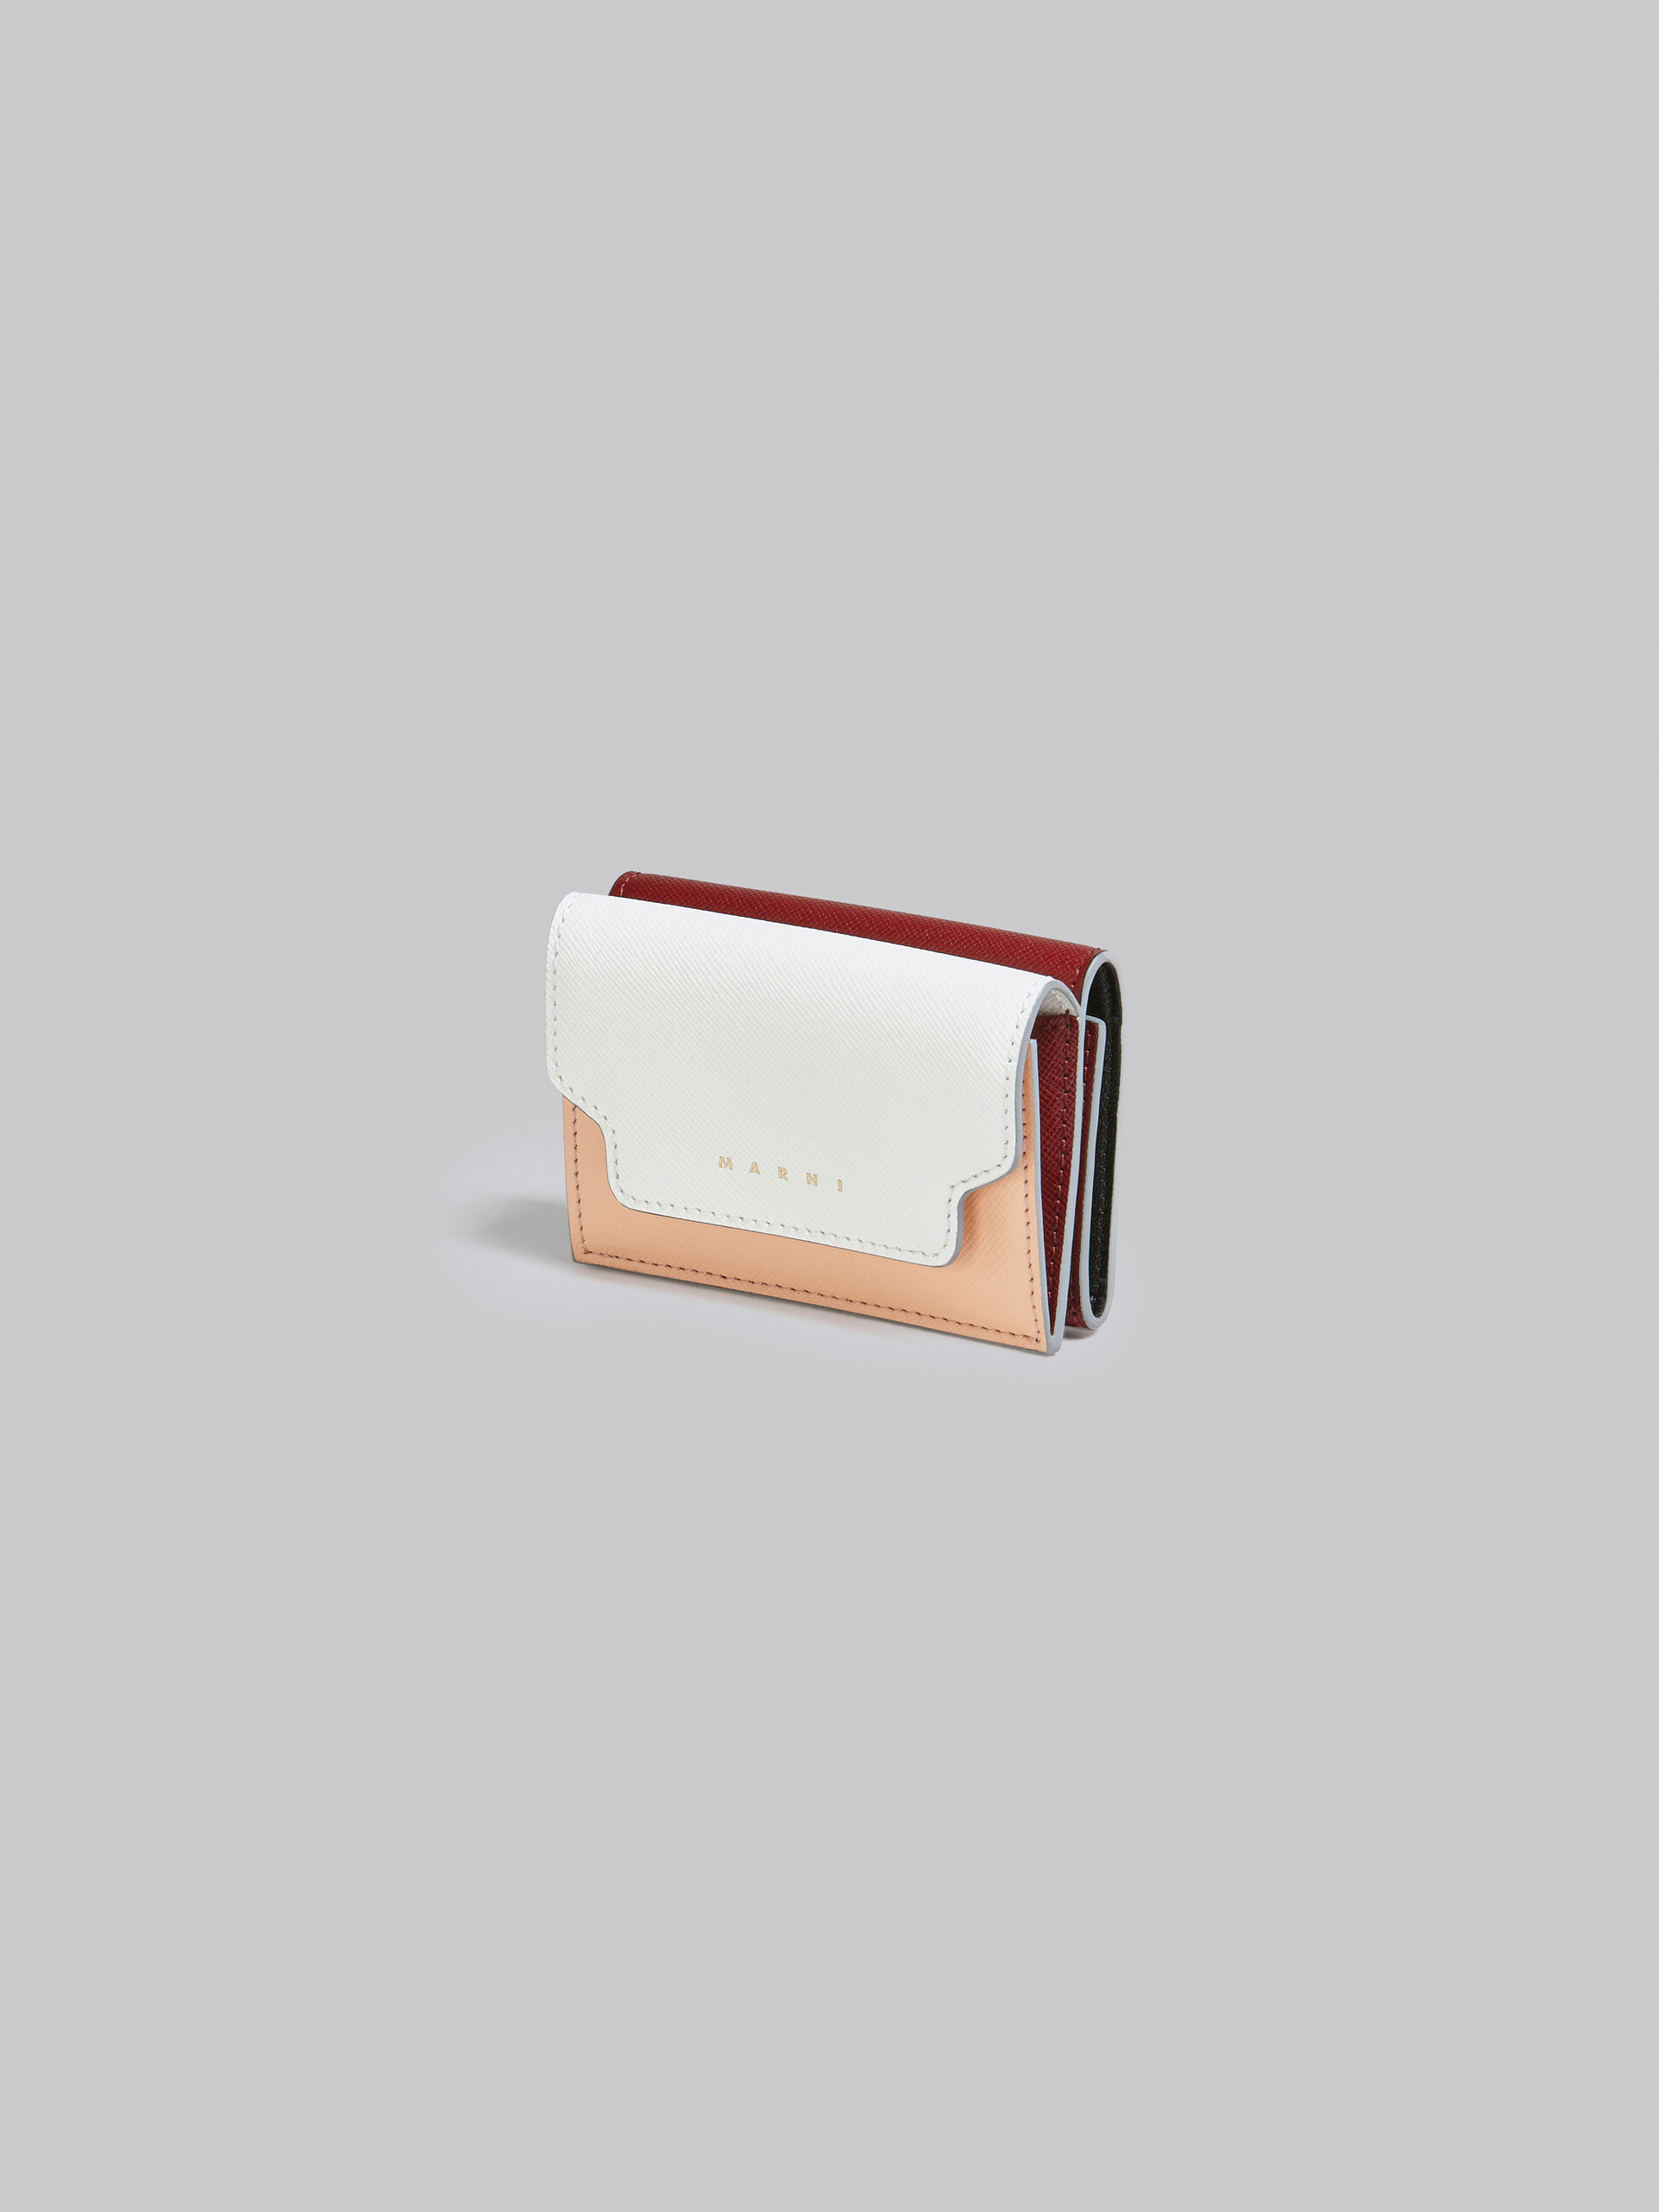 White pink and red saffiano leather tri-fold wallet - Wallets - Image 4